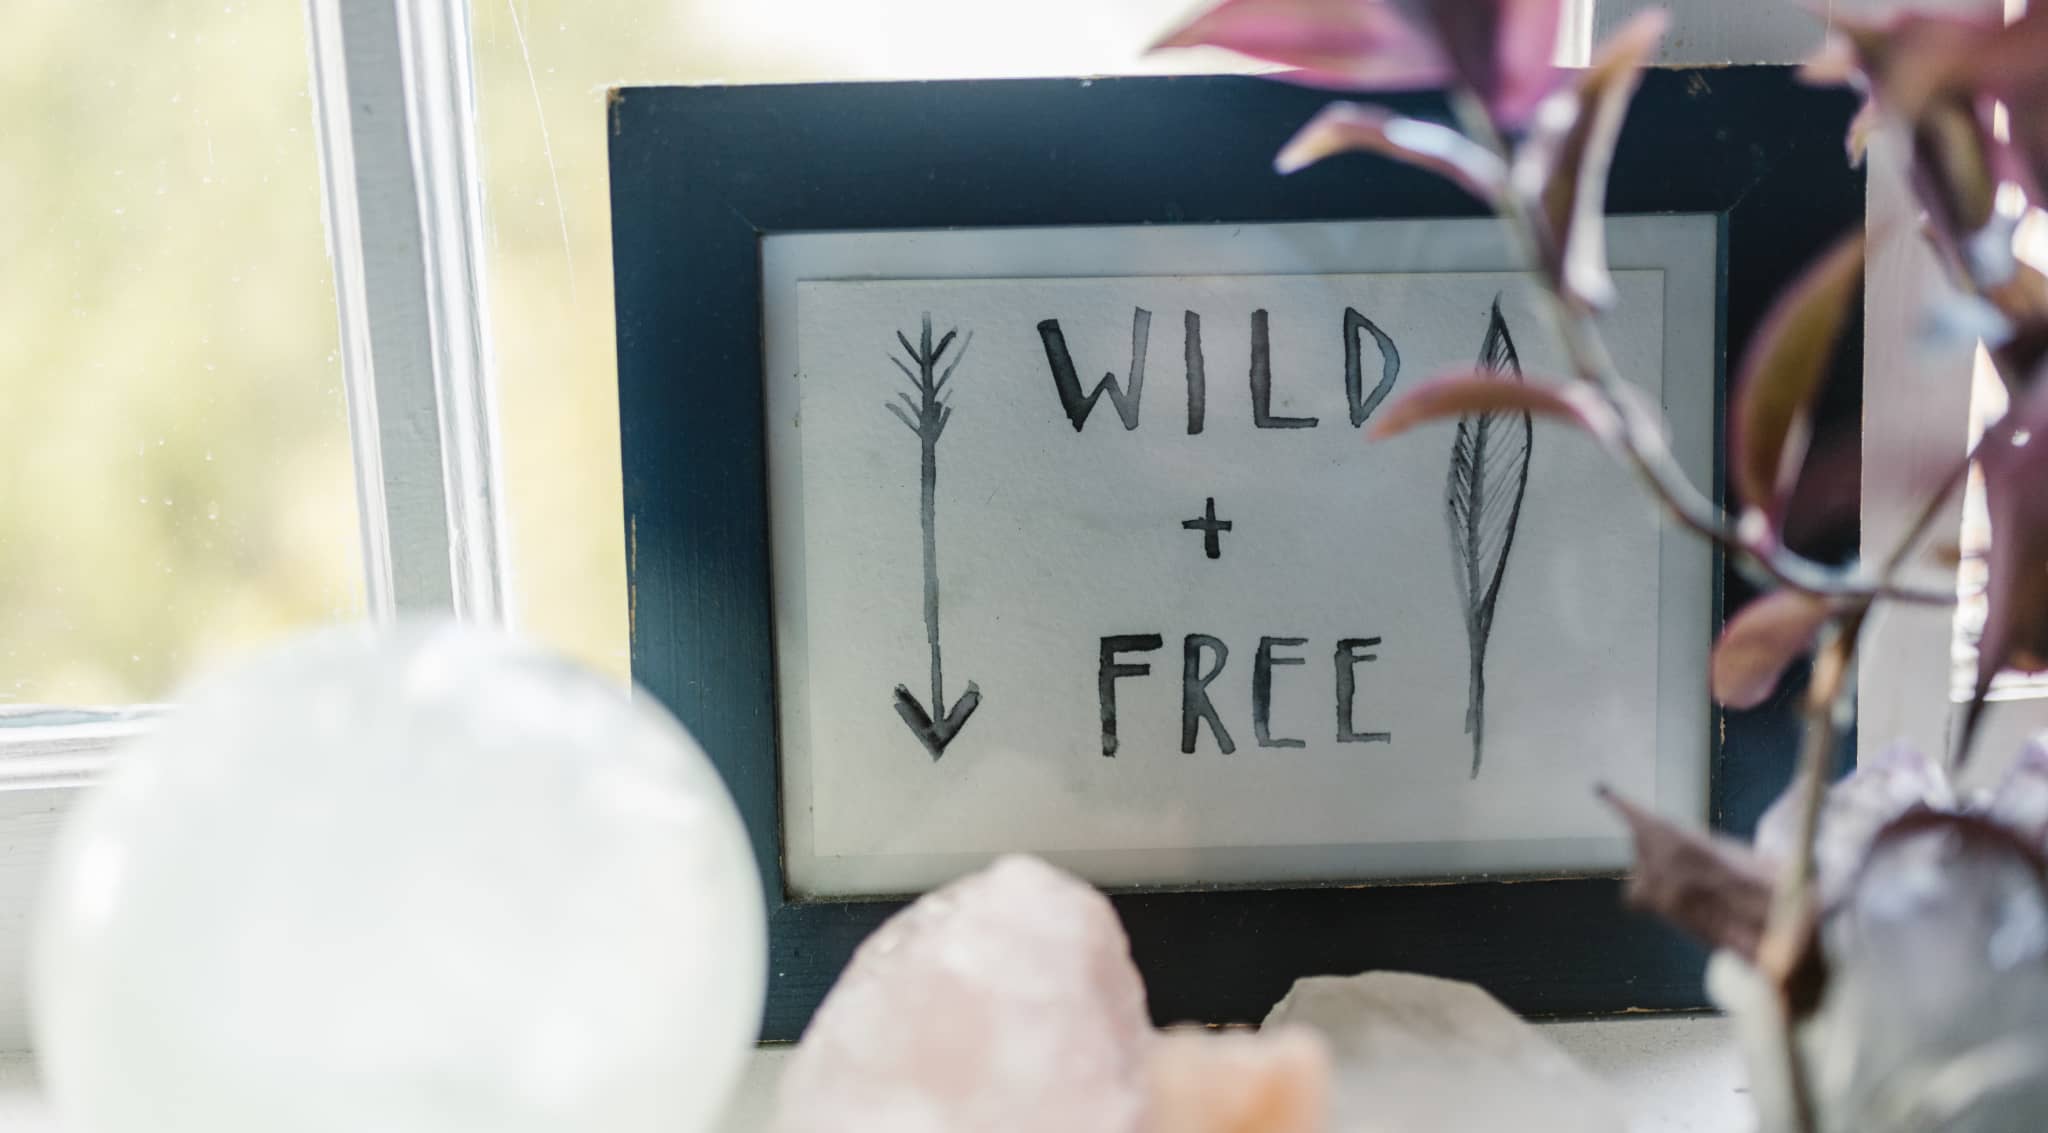 Blue picture frame with crystals and flowers around it, the frame holding the text "WILD + FREE" and an arrow on watercolour paper